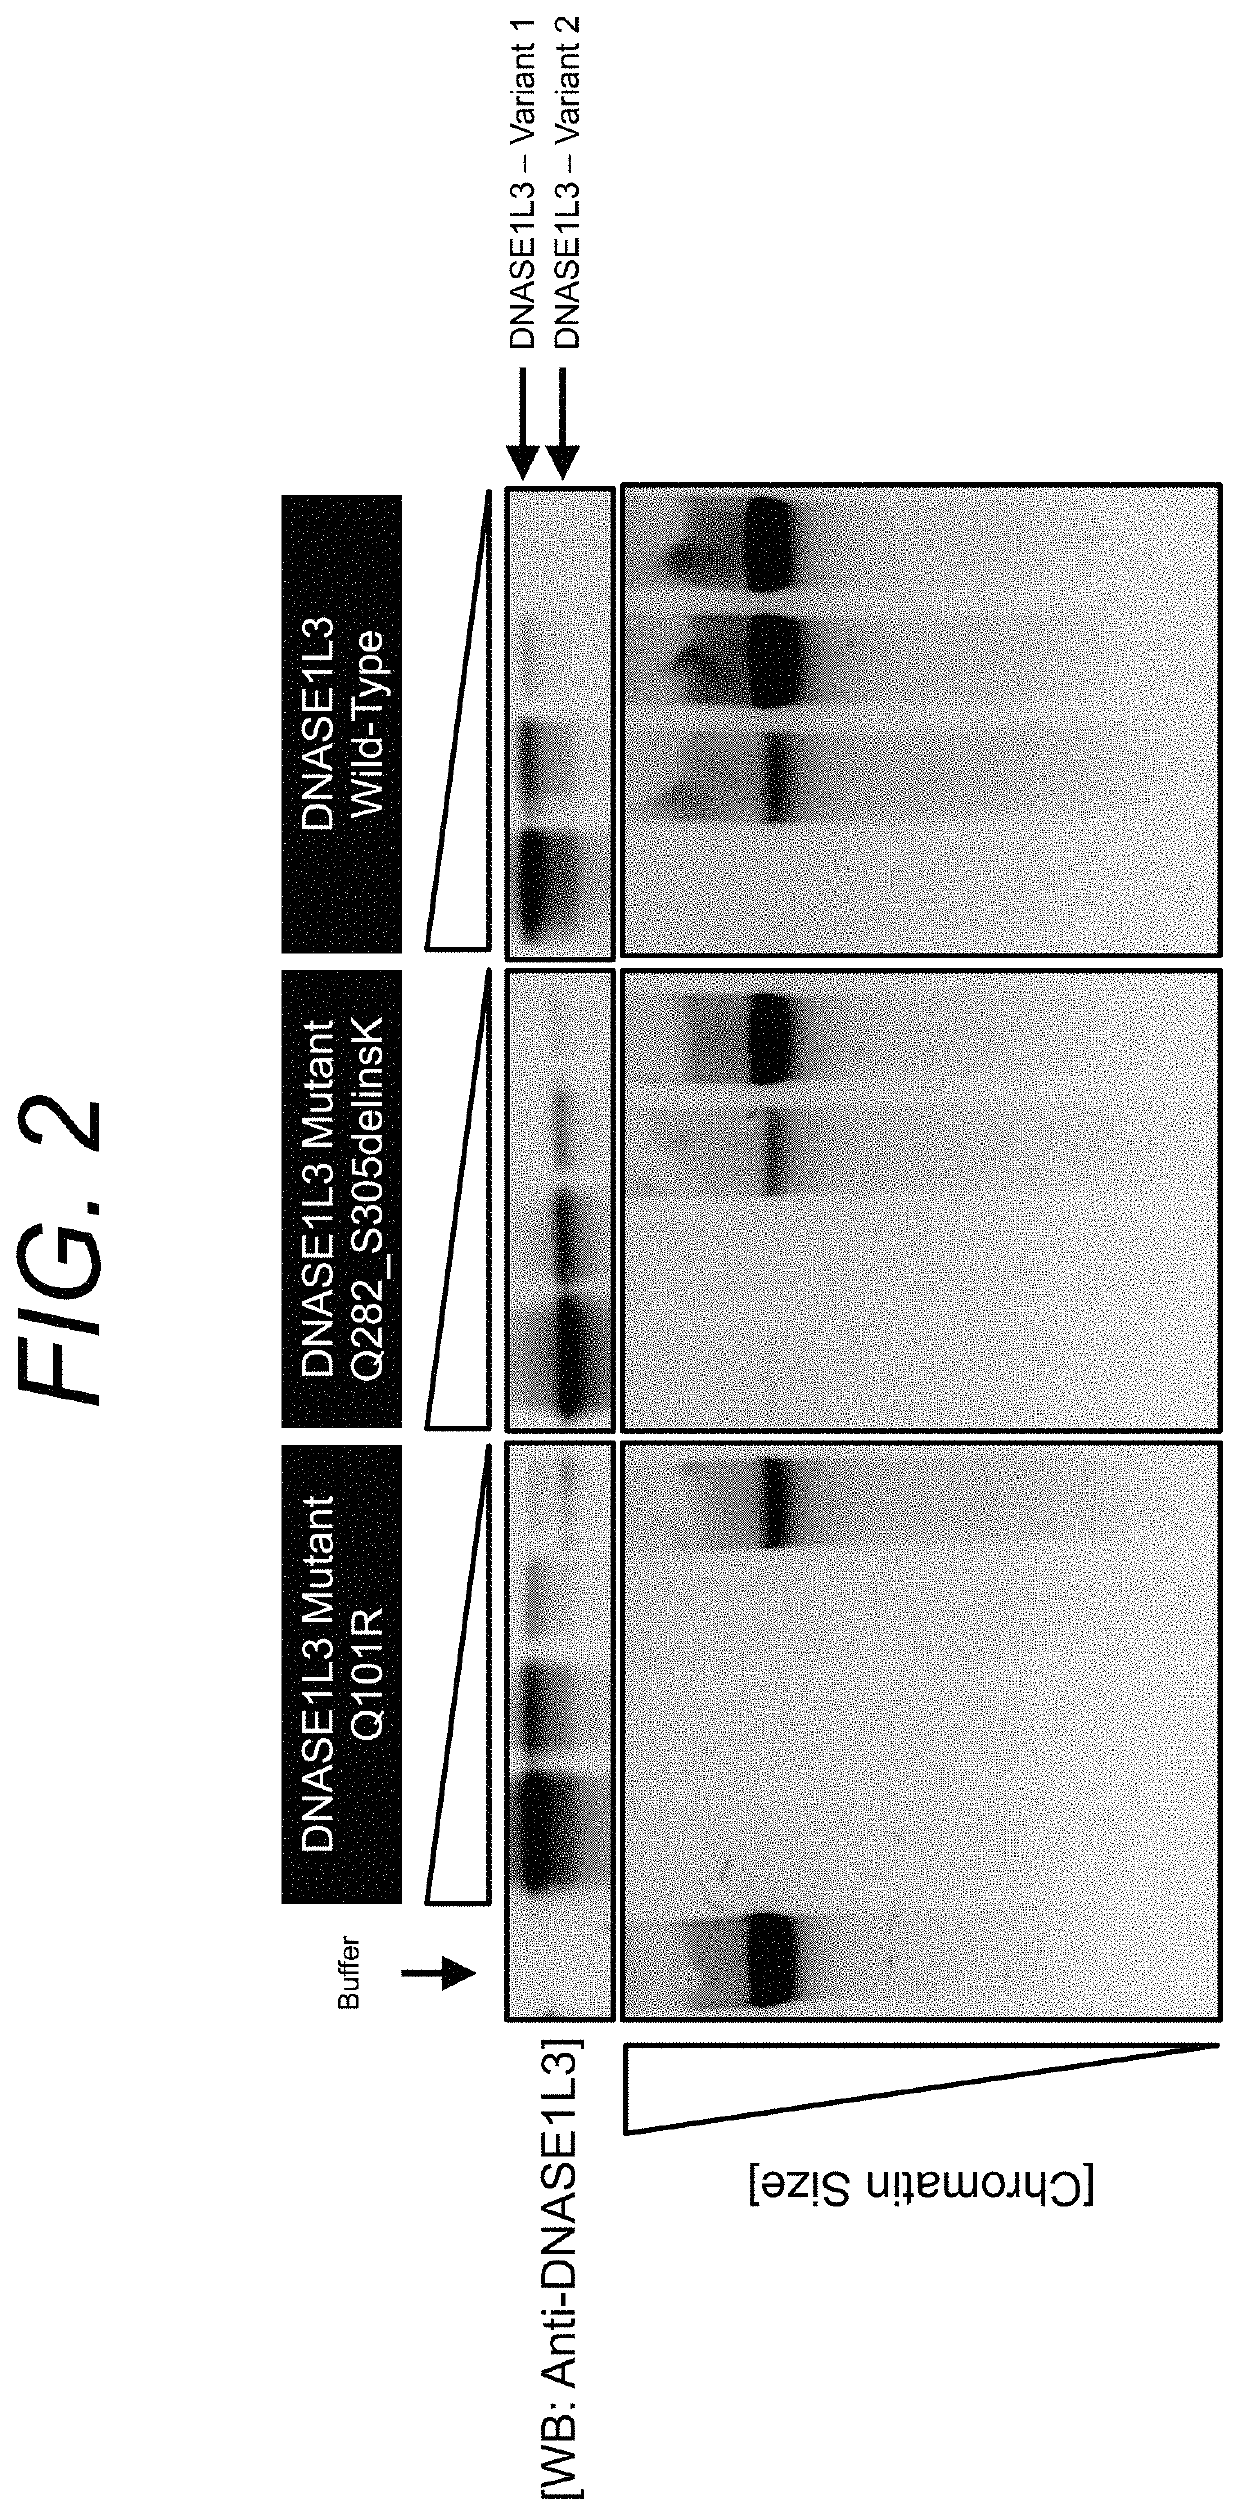 Manufacturing and engineering of DNASE enzymes for therapy